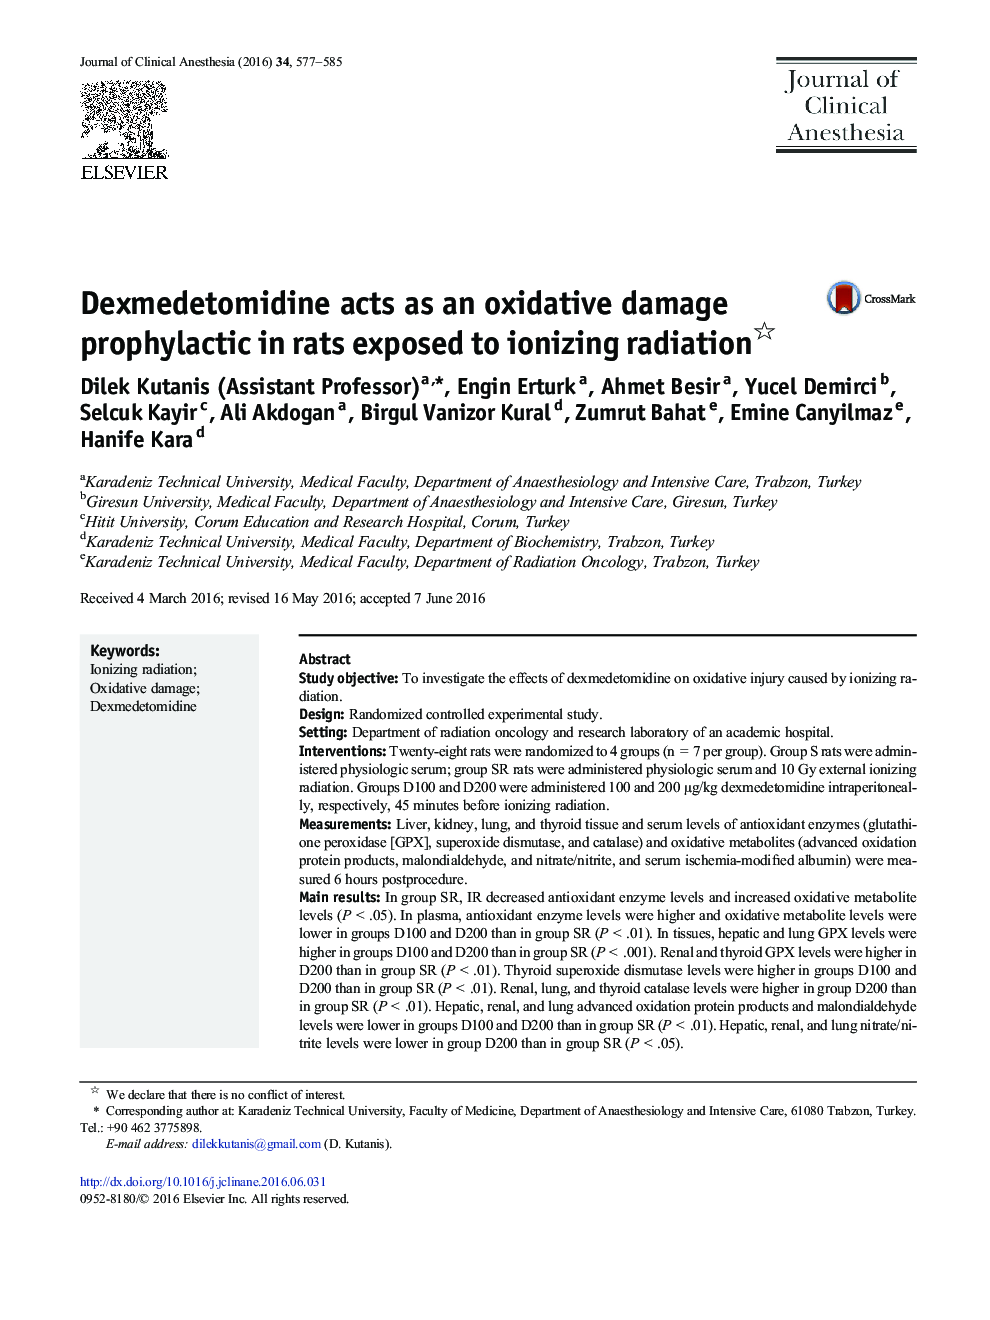 Dexmedetomidine acts as an oxidative damage prophylactic in rats exposed to ionizing radiation